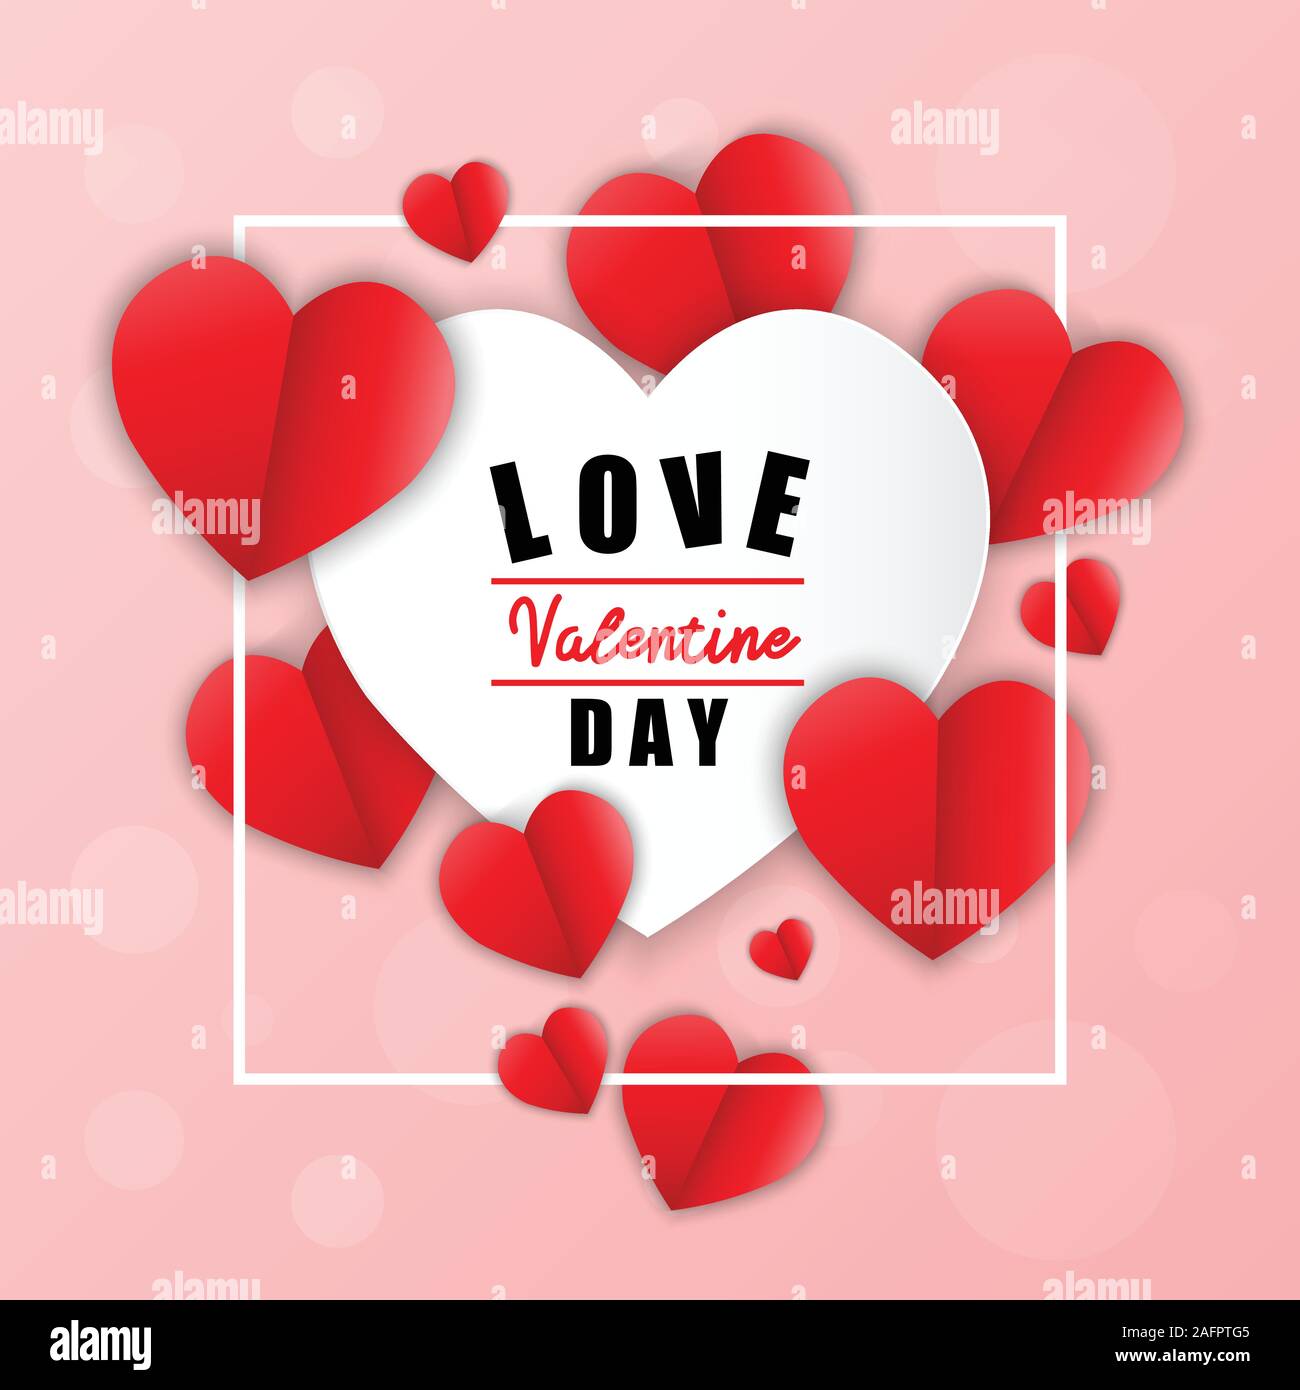 Love for Valentine's day. Happy valentines day and weeding design ...